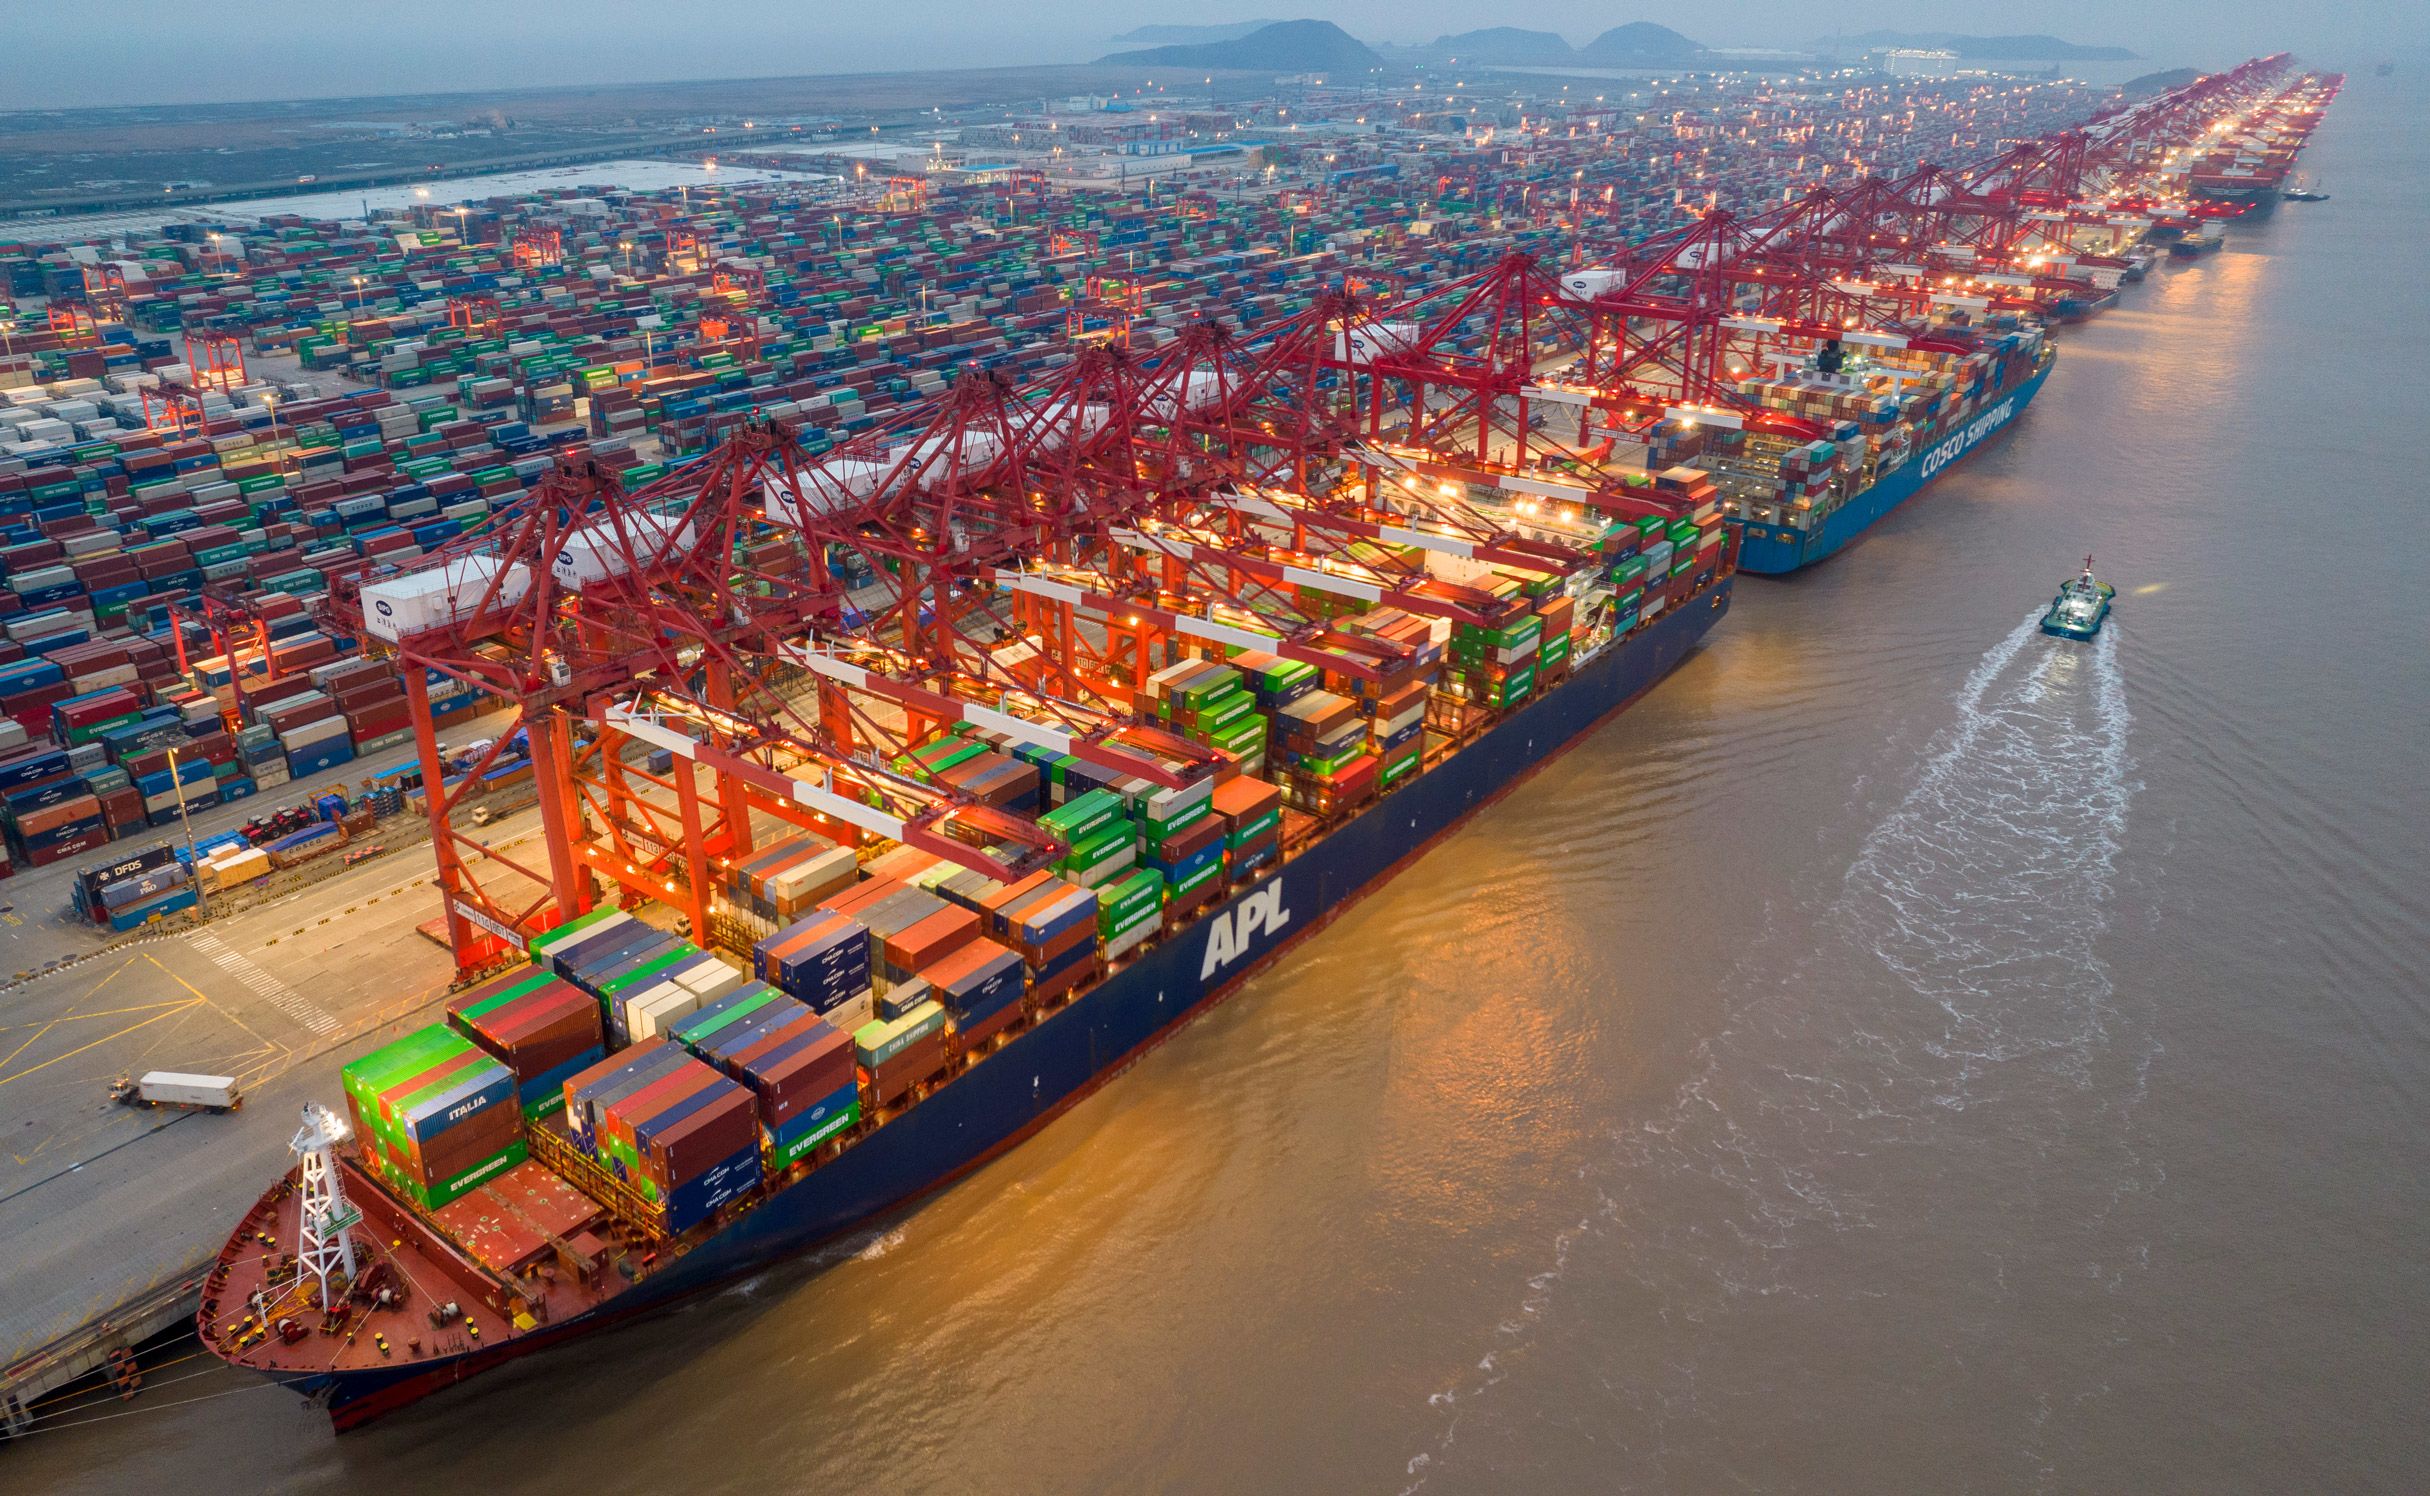 The World's Largest Ports: A Global Network of Trade and Commerce